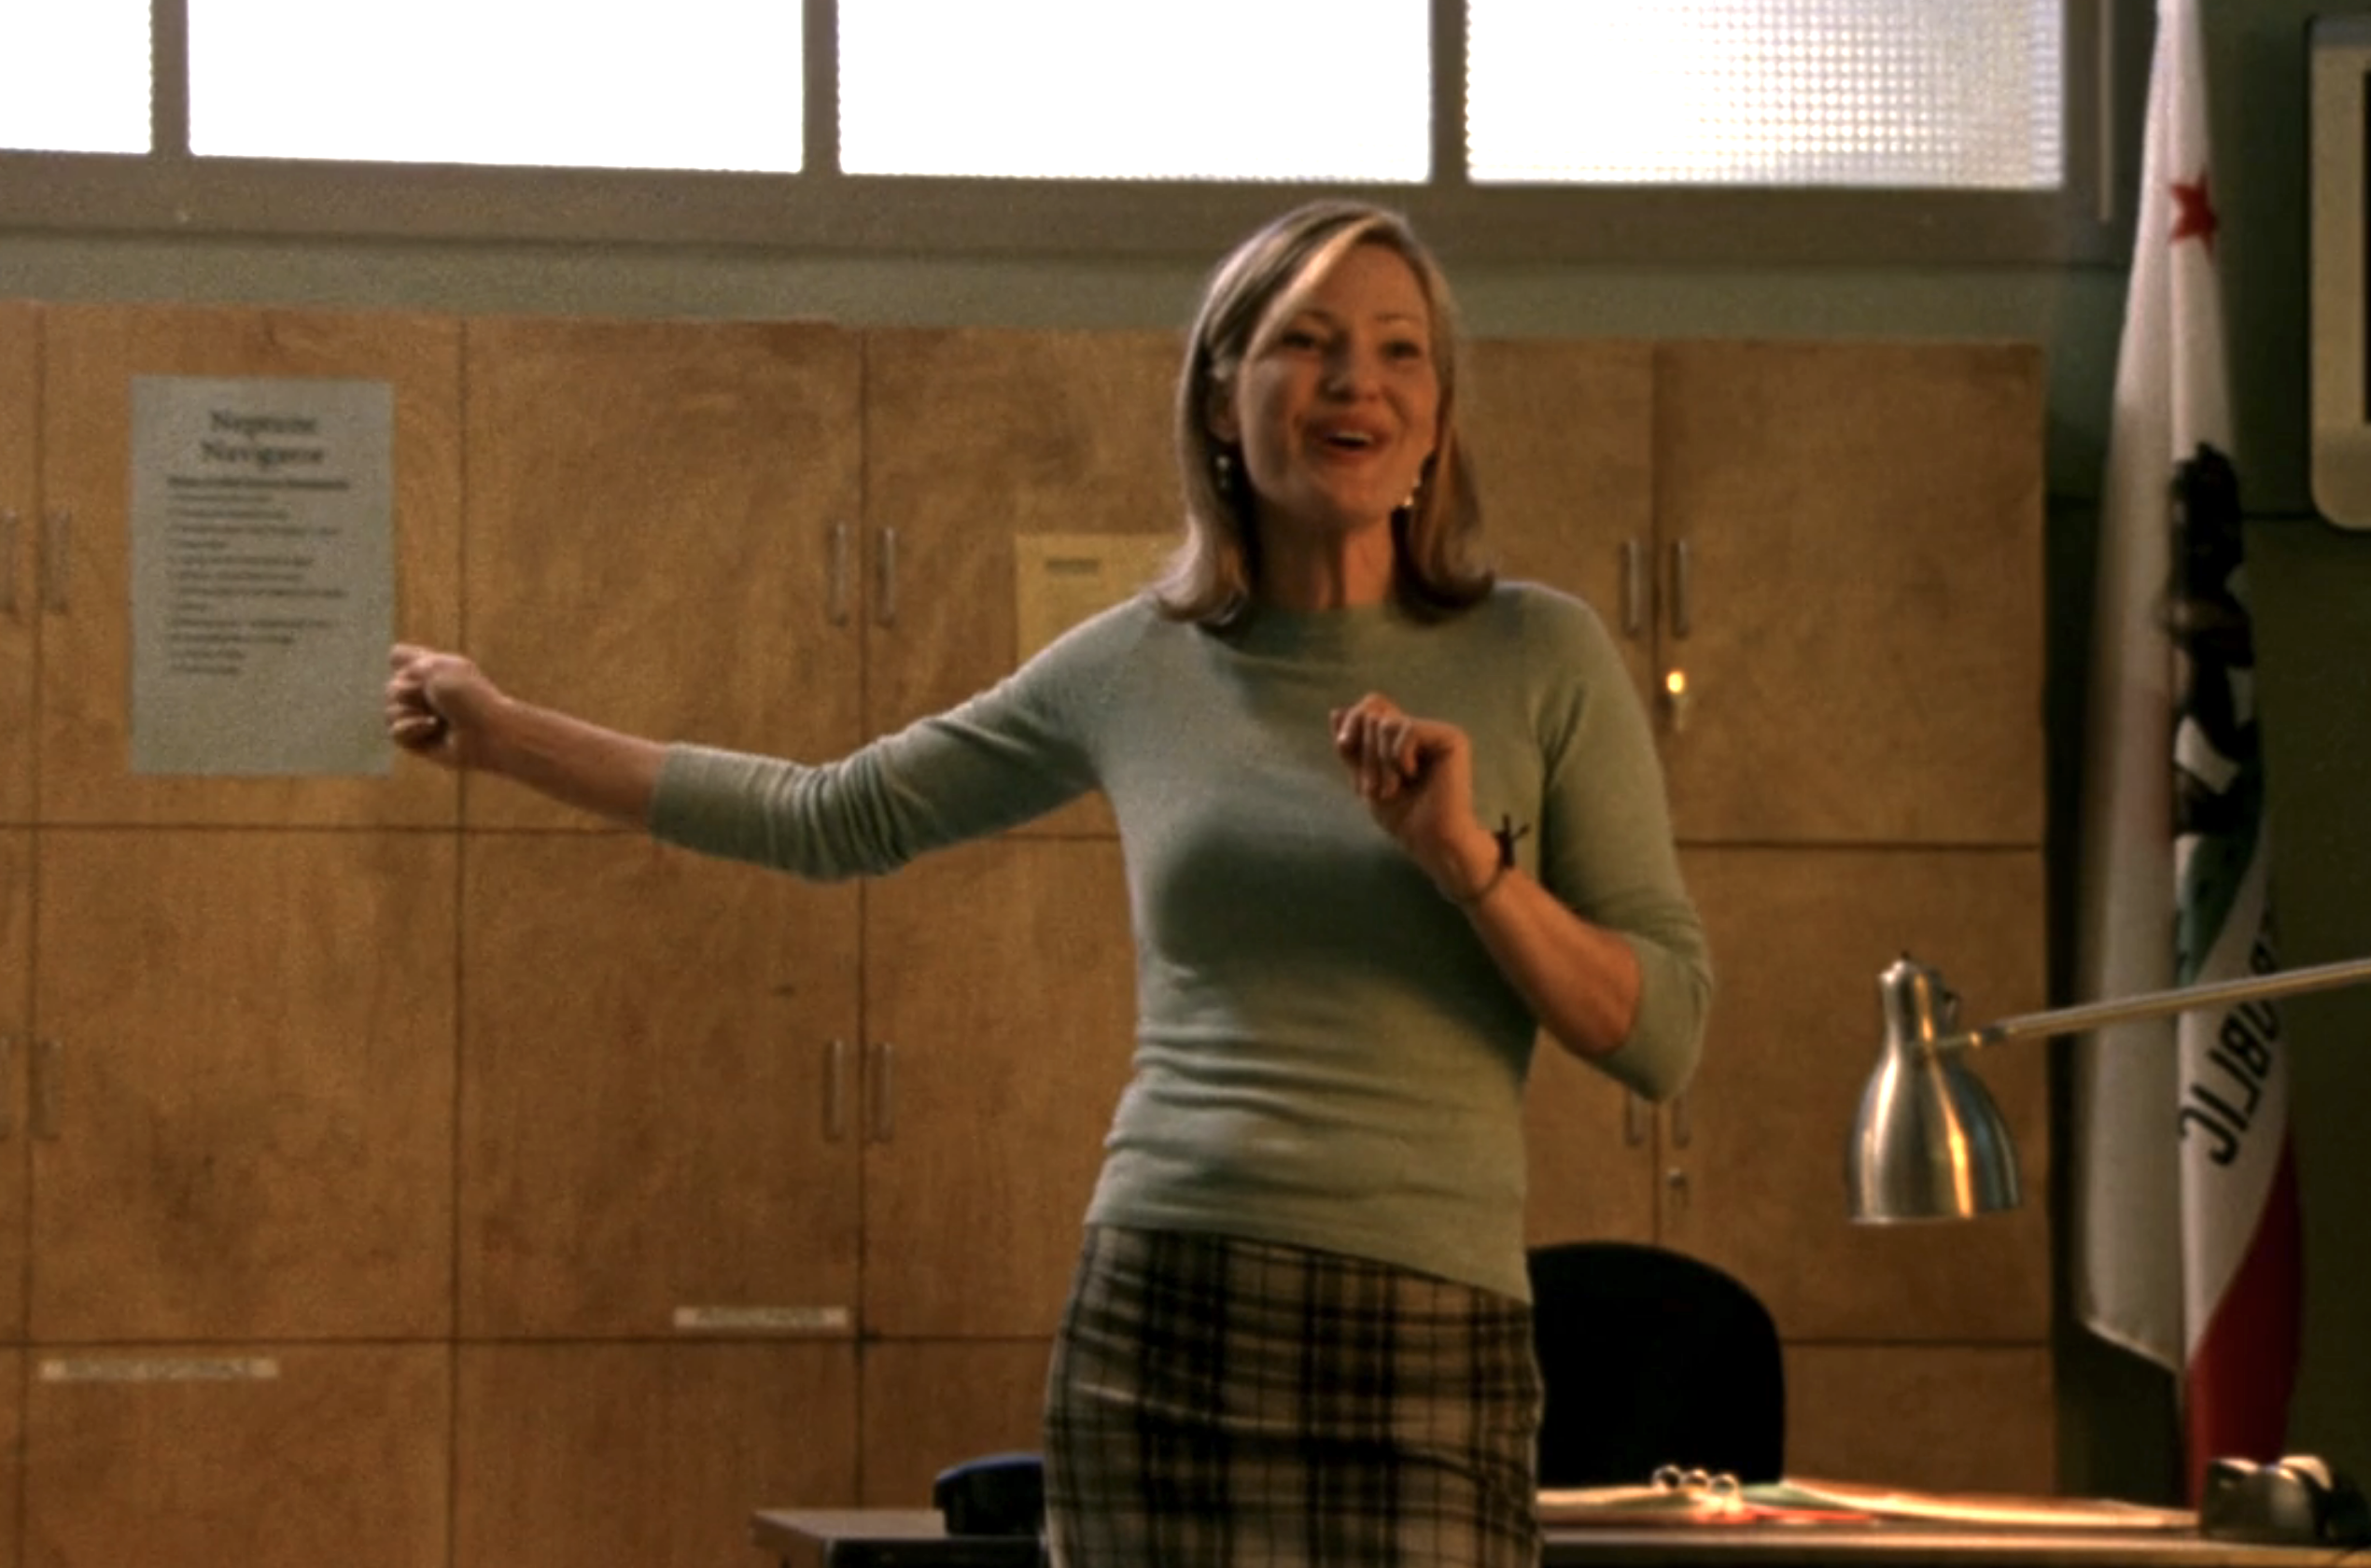 Screenshot from S1E18 of Veronica Mars. Joey Lauren Adams is standing in the front of a classroom smiling and gesturing with her arm.